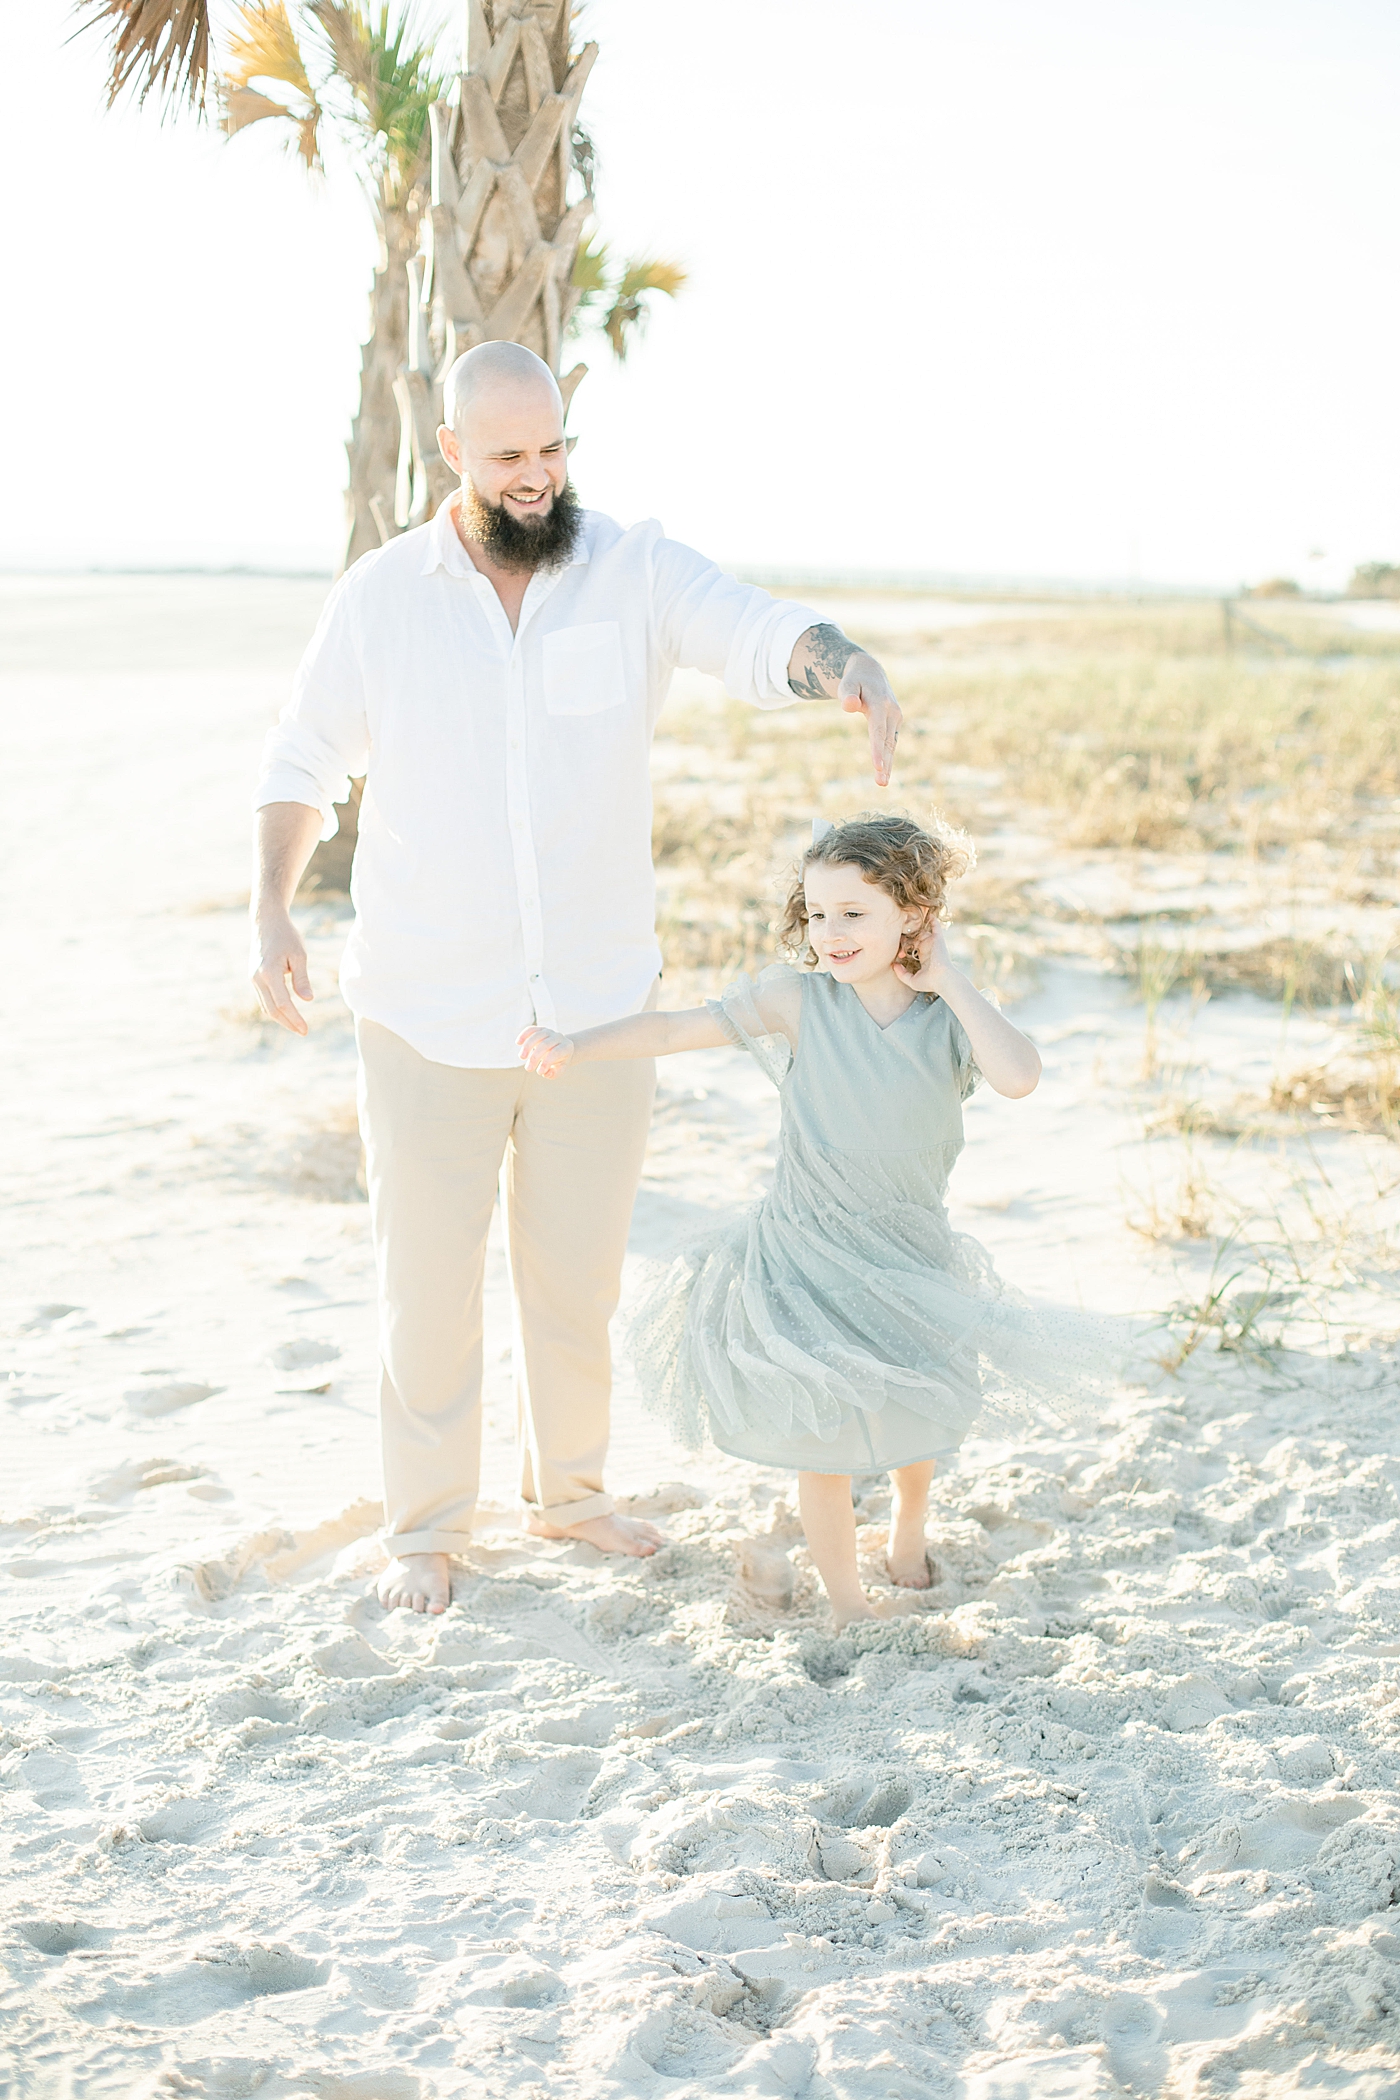 Daddy and daughter dancing on the beach | Photo by Ocean Springs Family Photographer Little Sunshine Photography